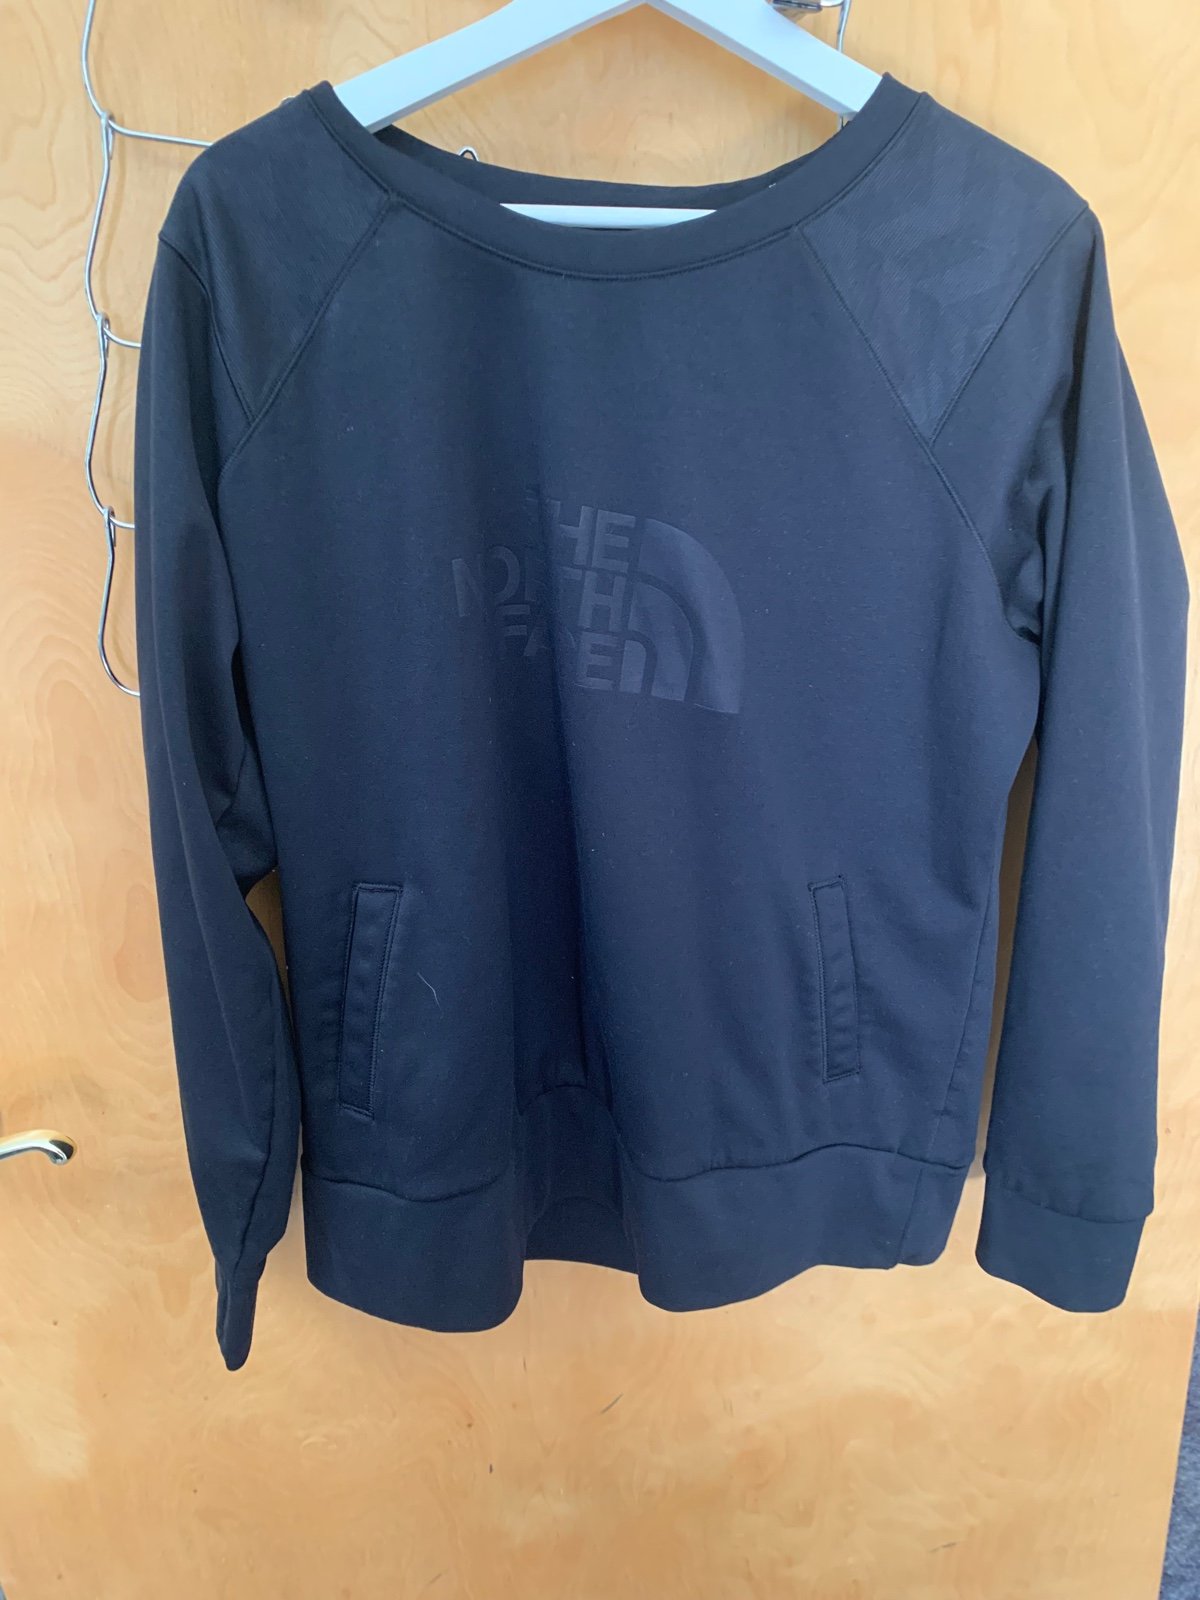 reasonable price The North Face sweater ifYRbLVpn Novel 